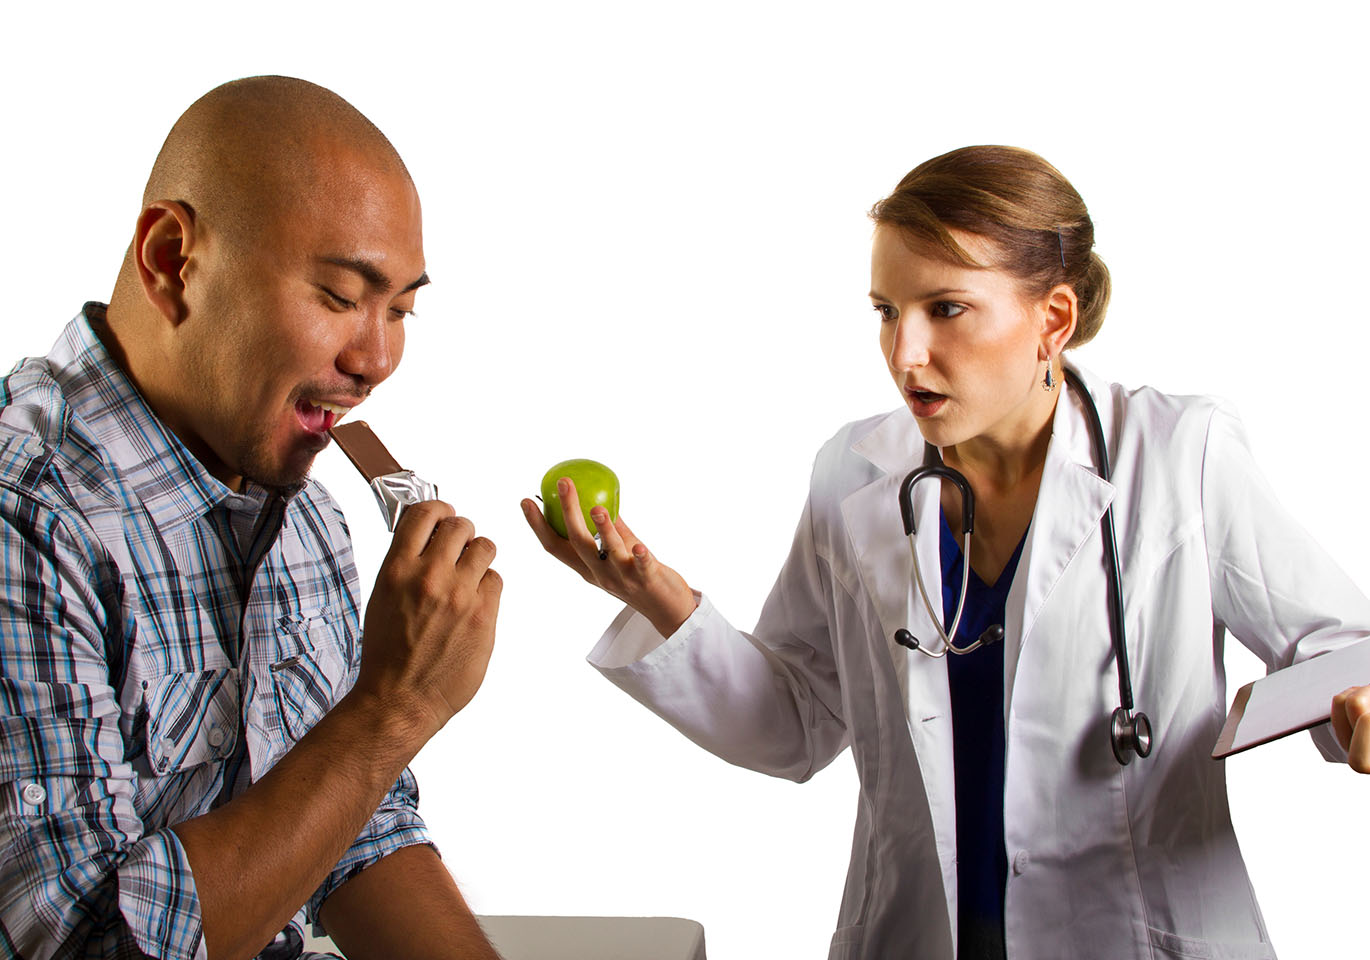 Doctor holding an apple is shocked by a patient eating a chocolate bar.